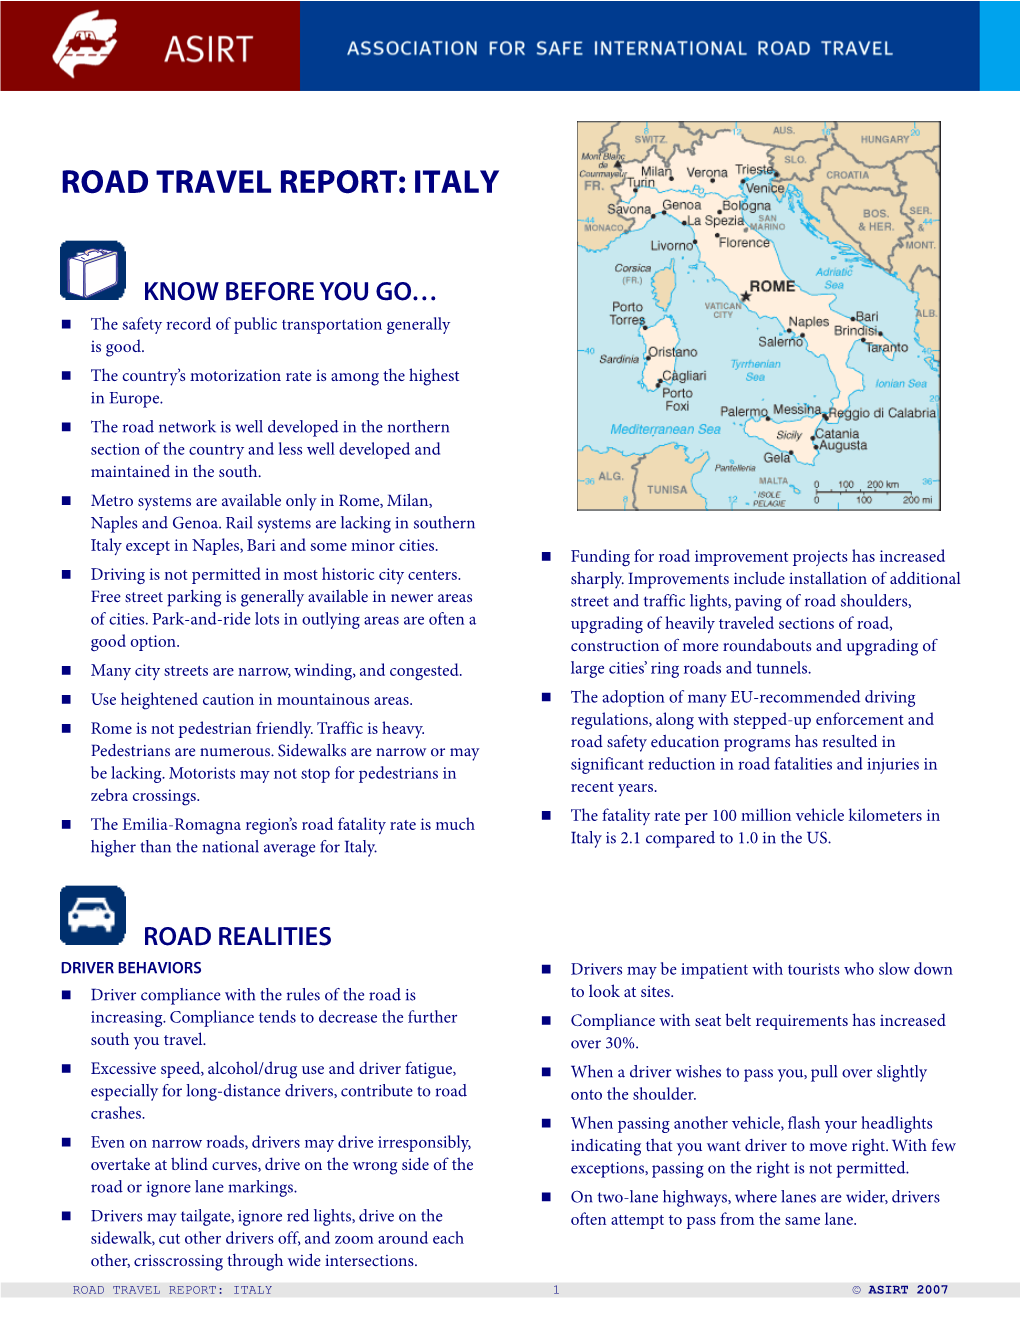 Road Travel Report: Italy